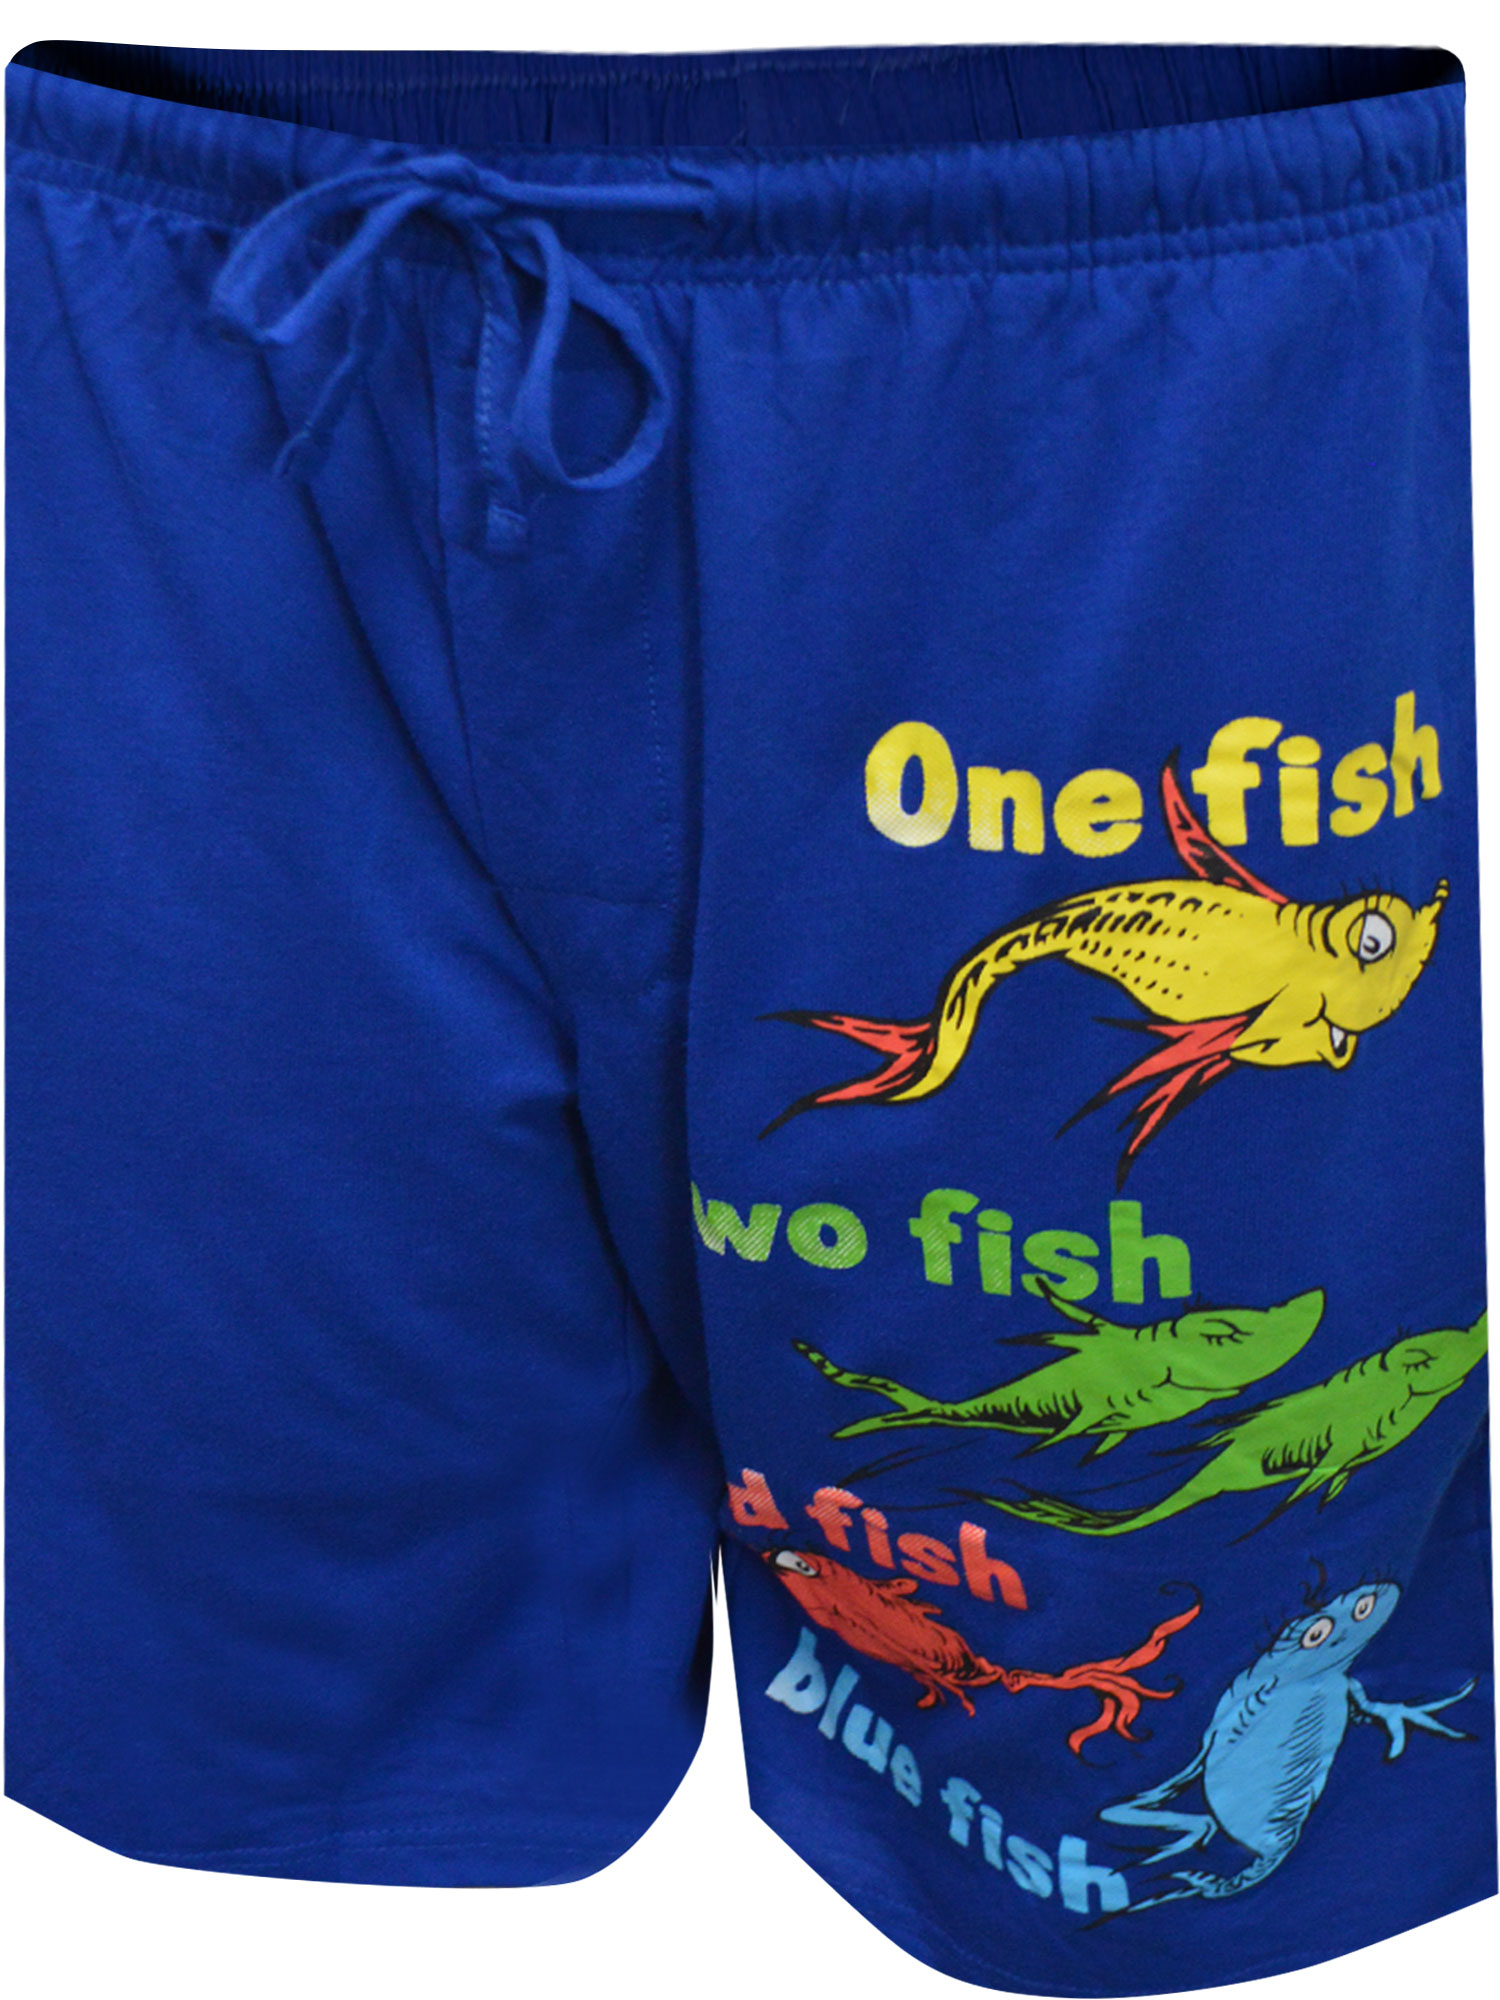 MJC Mens Dr Seuss One Fish Two Fish Blue Lounge Shorts (Small) - image 1 of 3